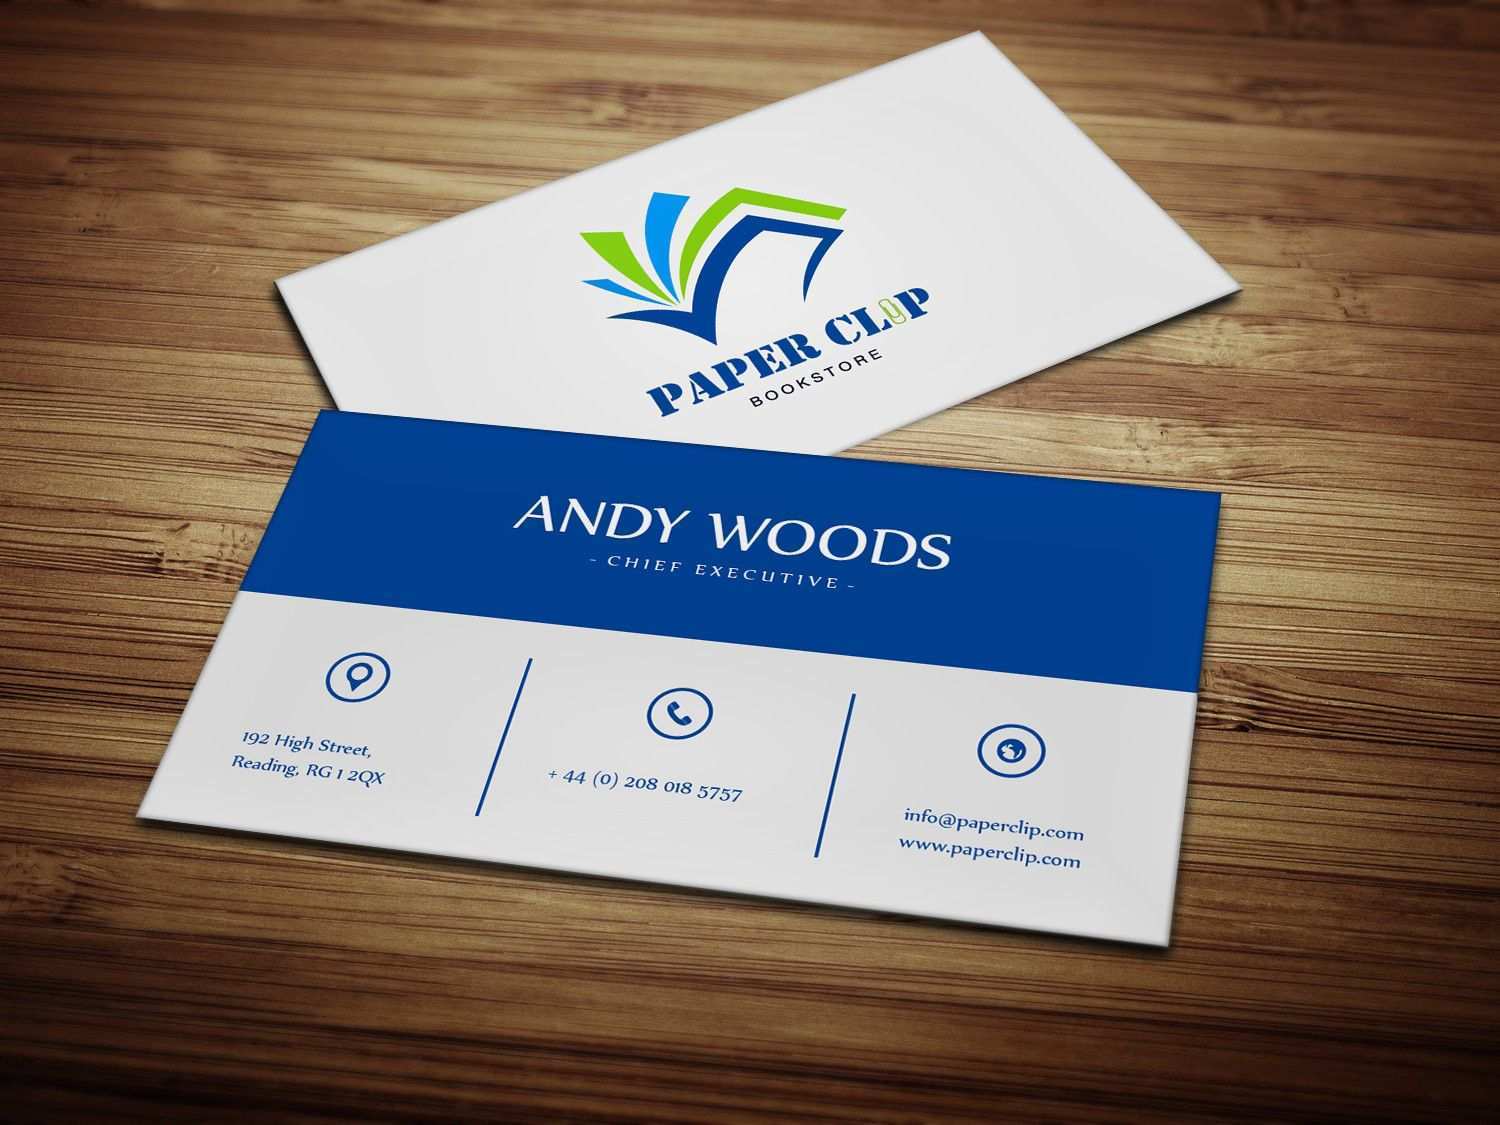 Staples Business Card Template 8371 Cards Design Templates